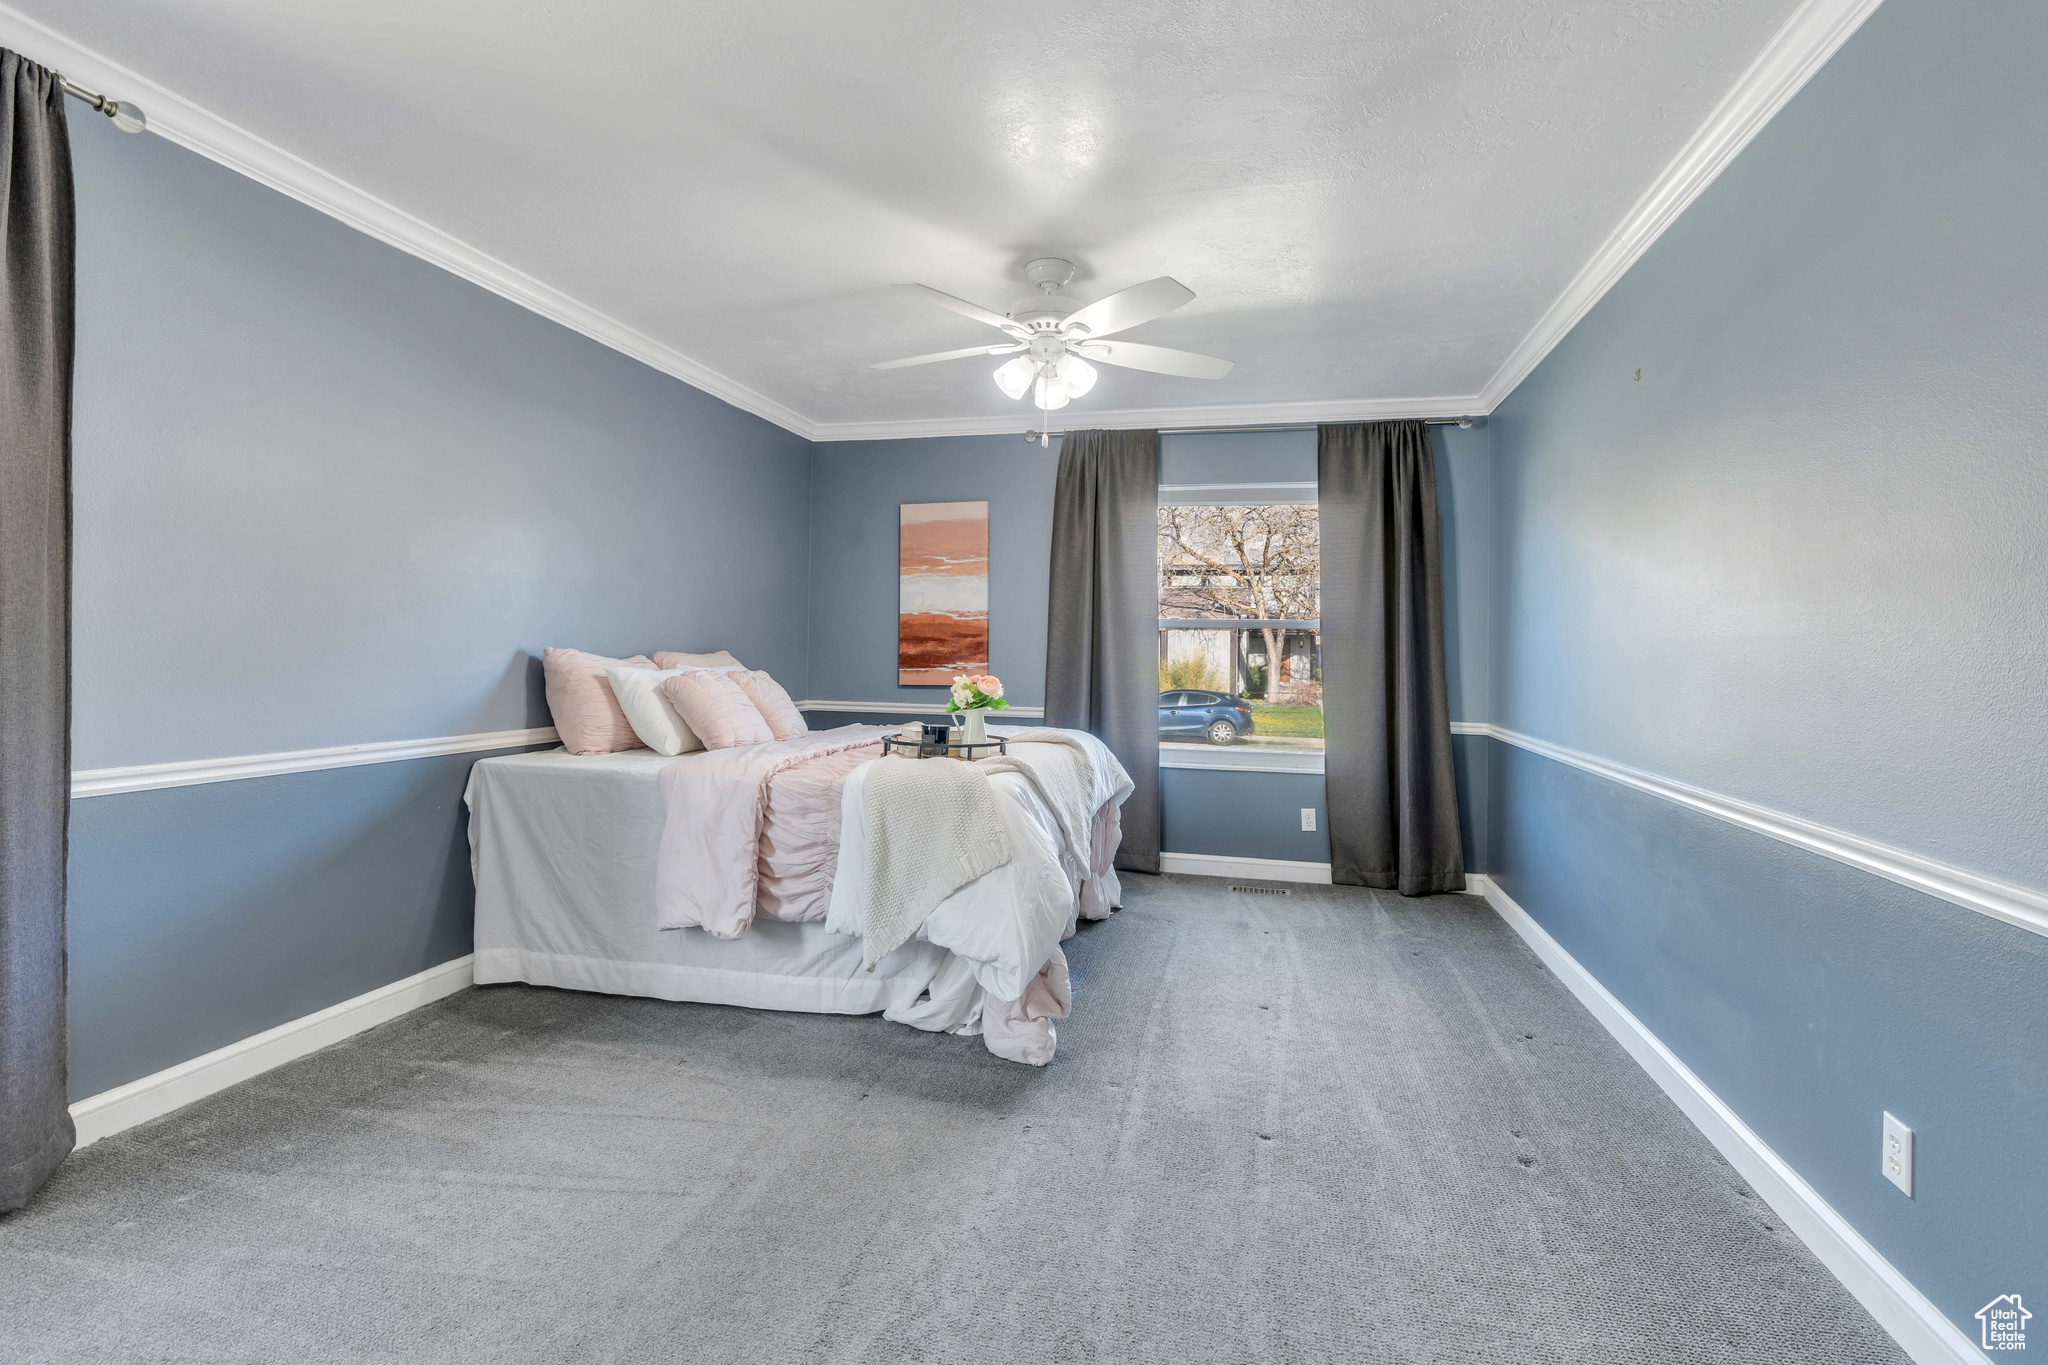 Bedroom featuring ceiling fan, carpet, and ornamental molding